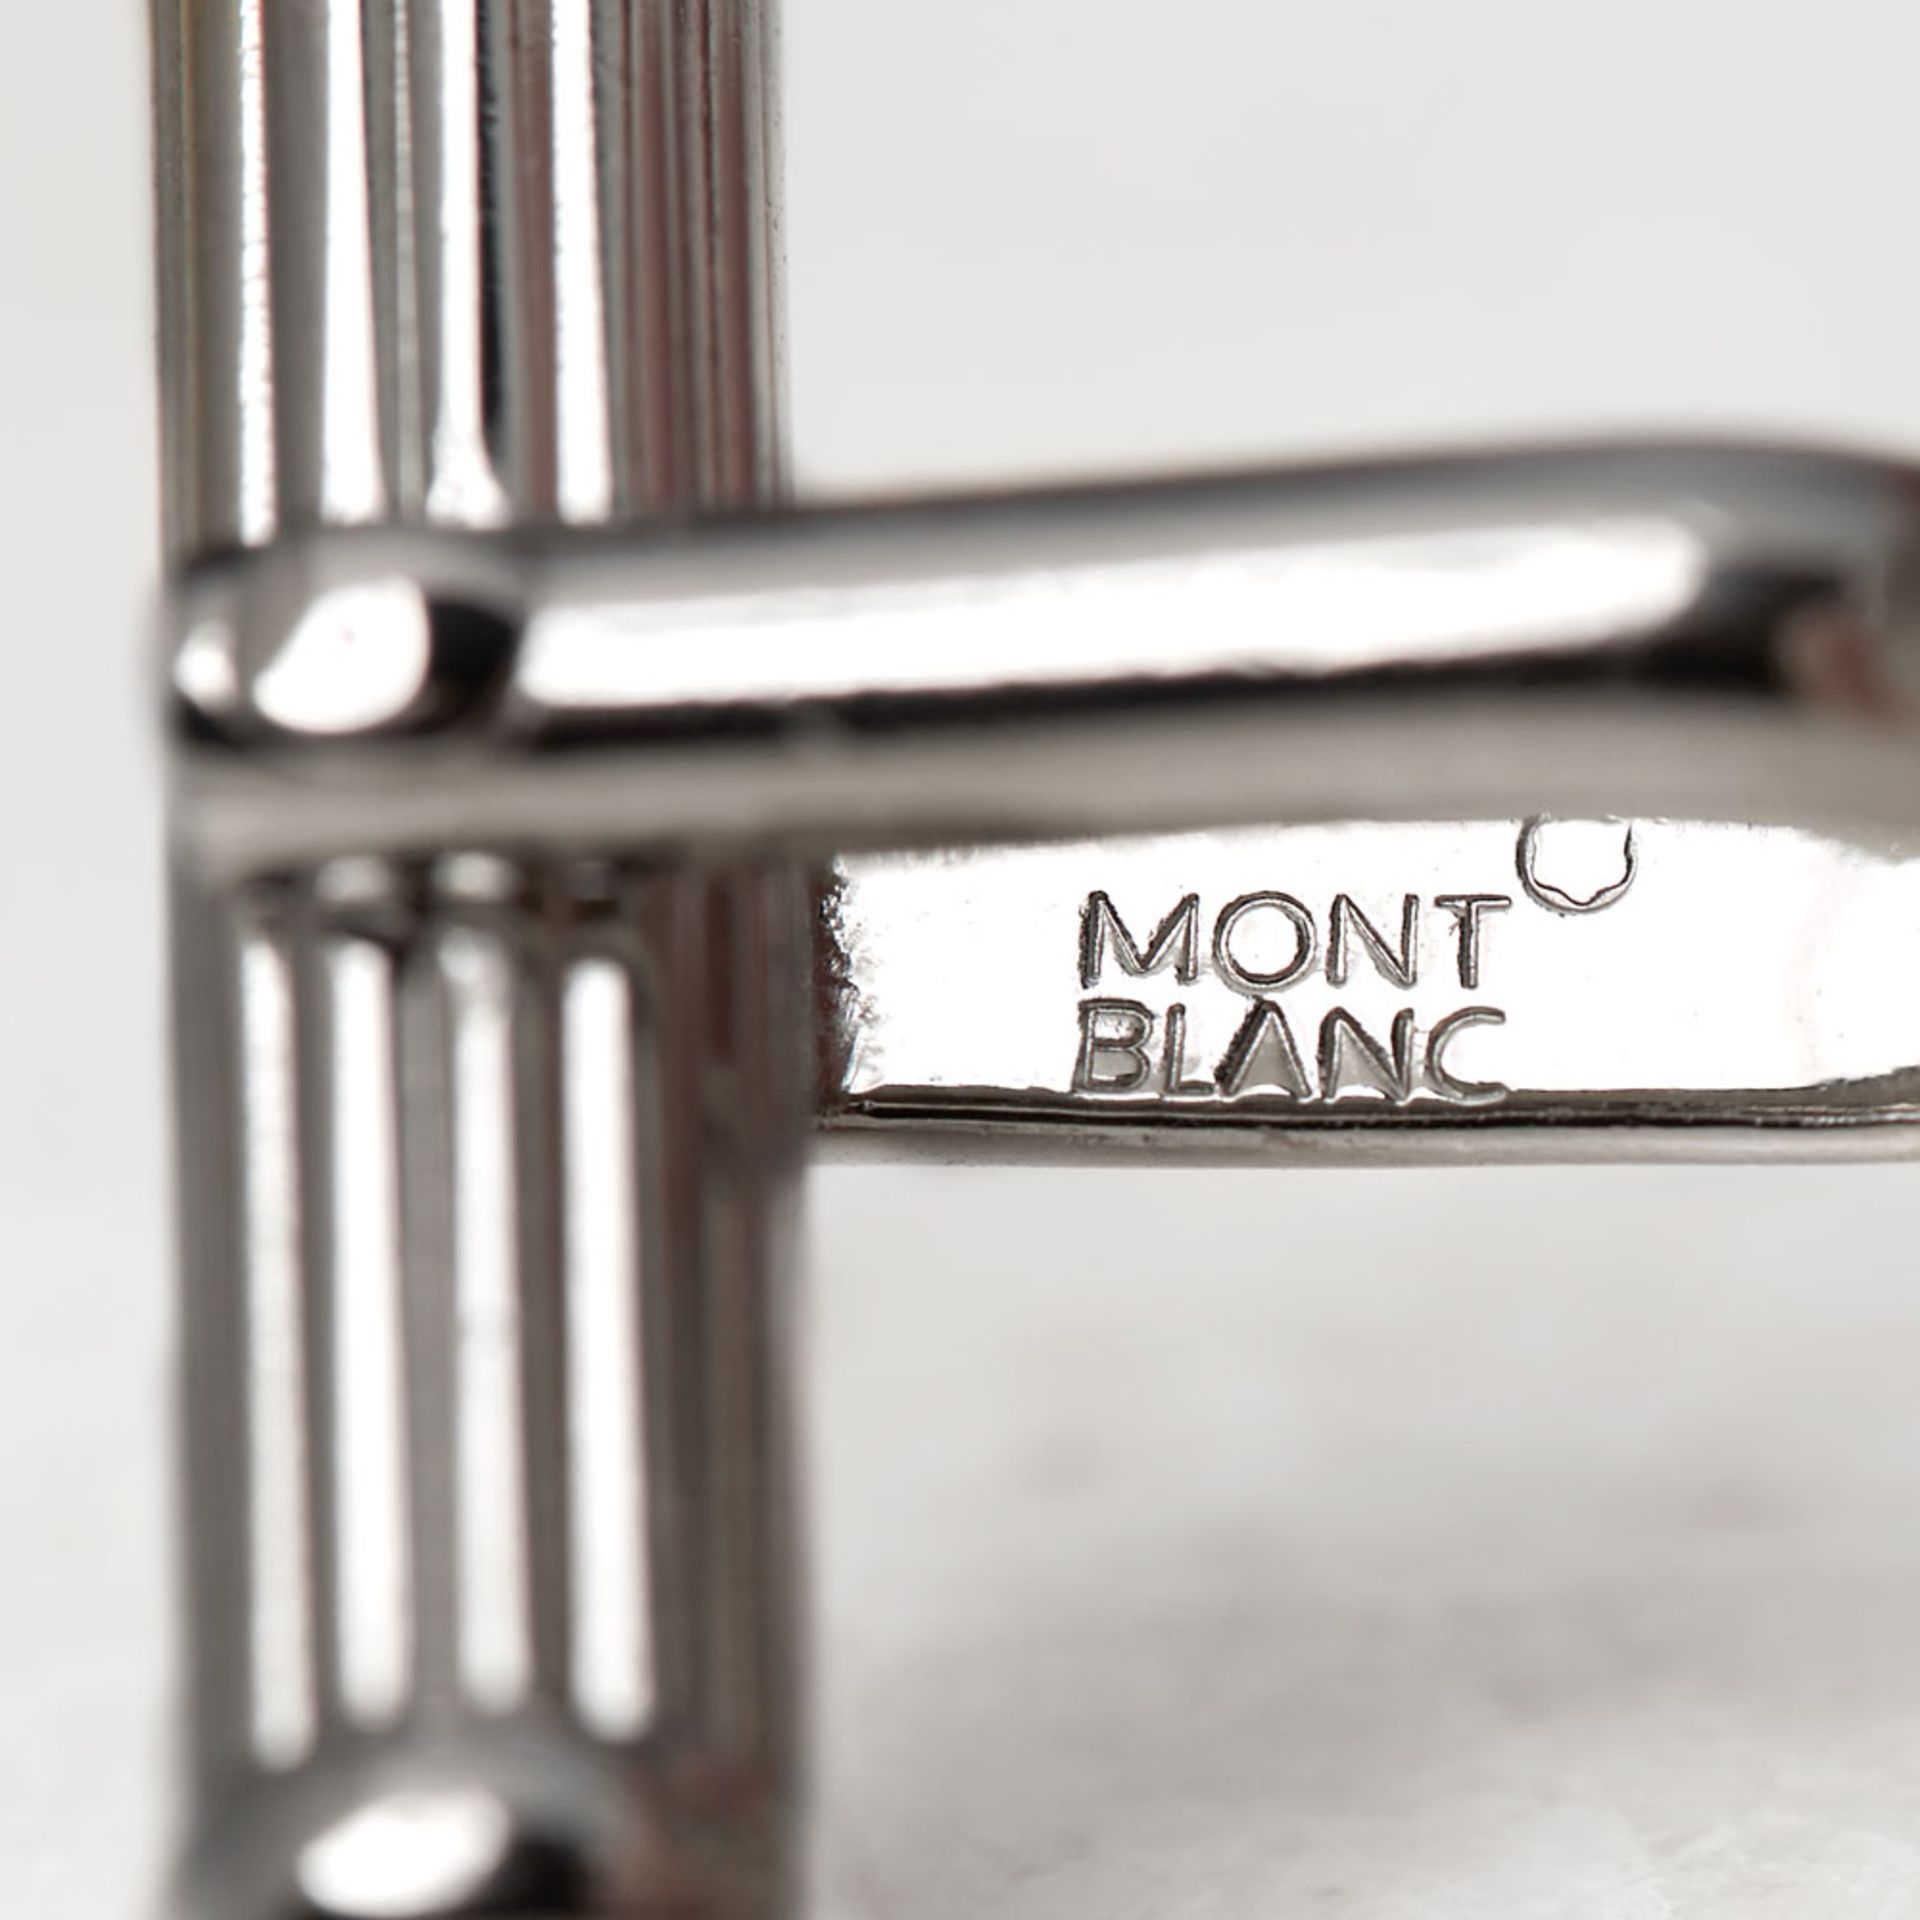 Montblanc Stainless Steel Black Onyx Iconic Cufflinks - Image 4 of 4